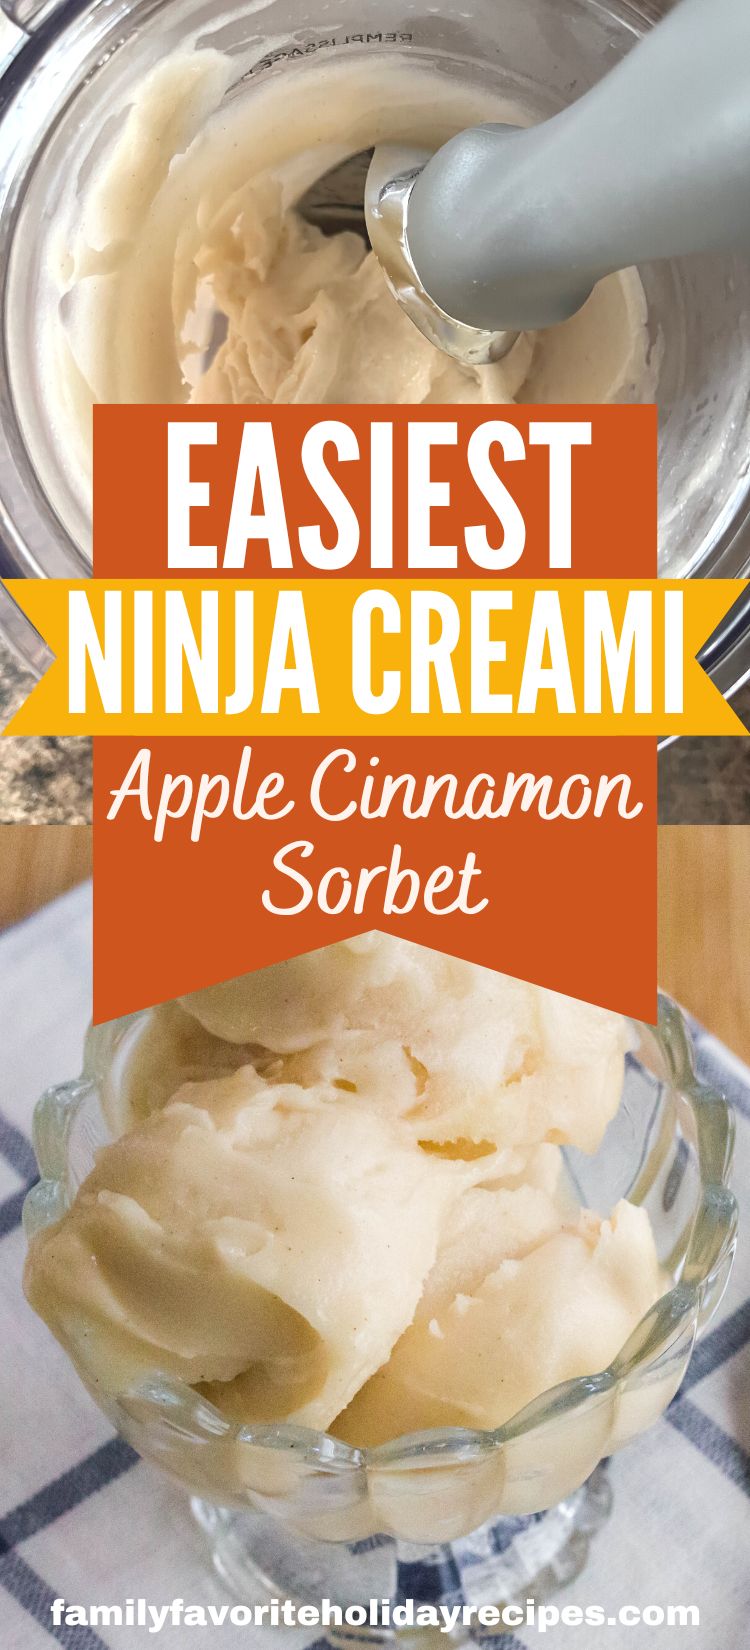 two photos showing different views of ninja creami apple cinnamon sorbet-one in the pint and one served in a dish